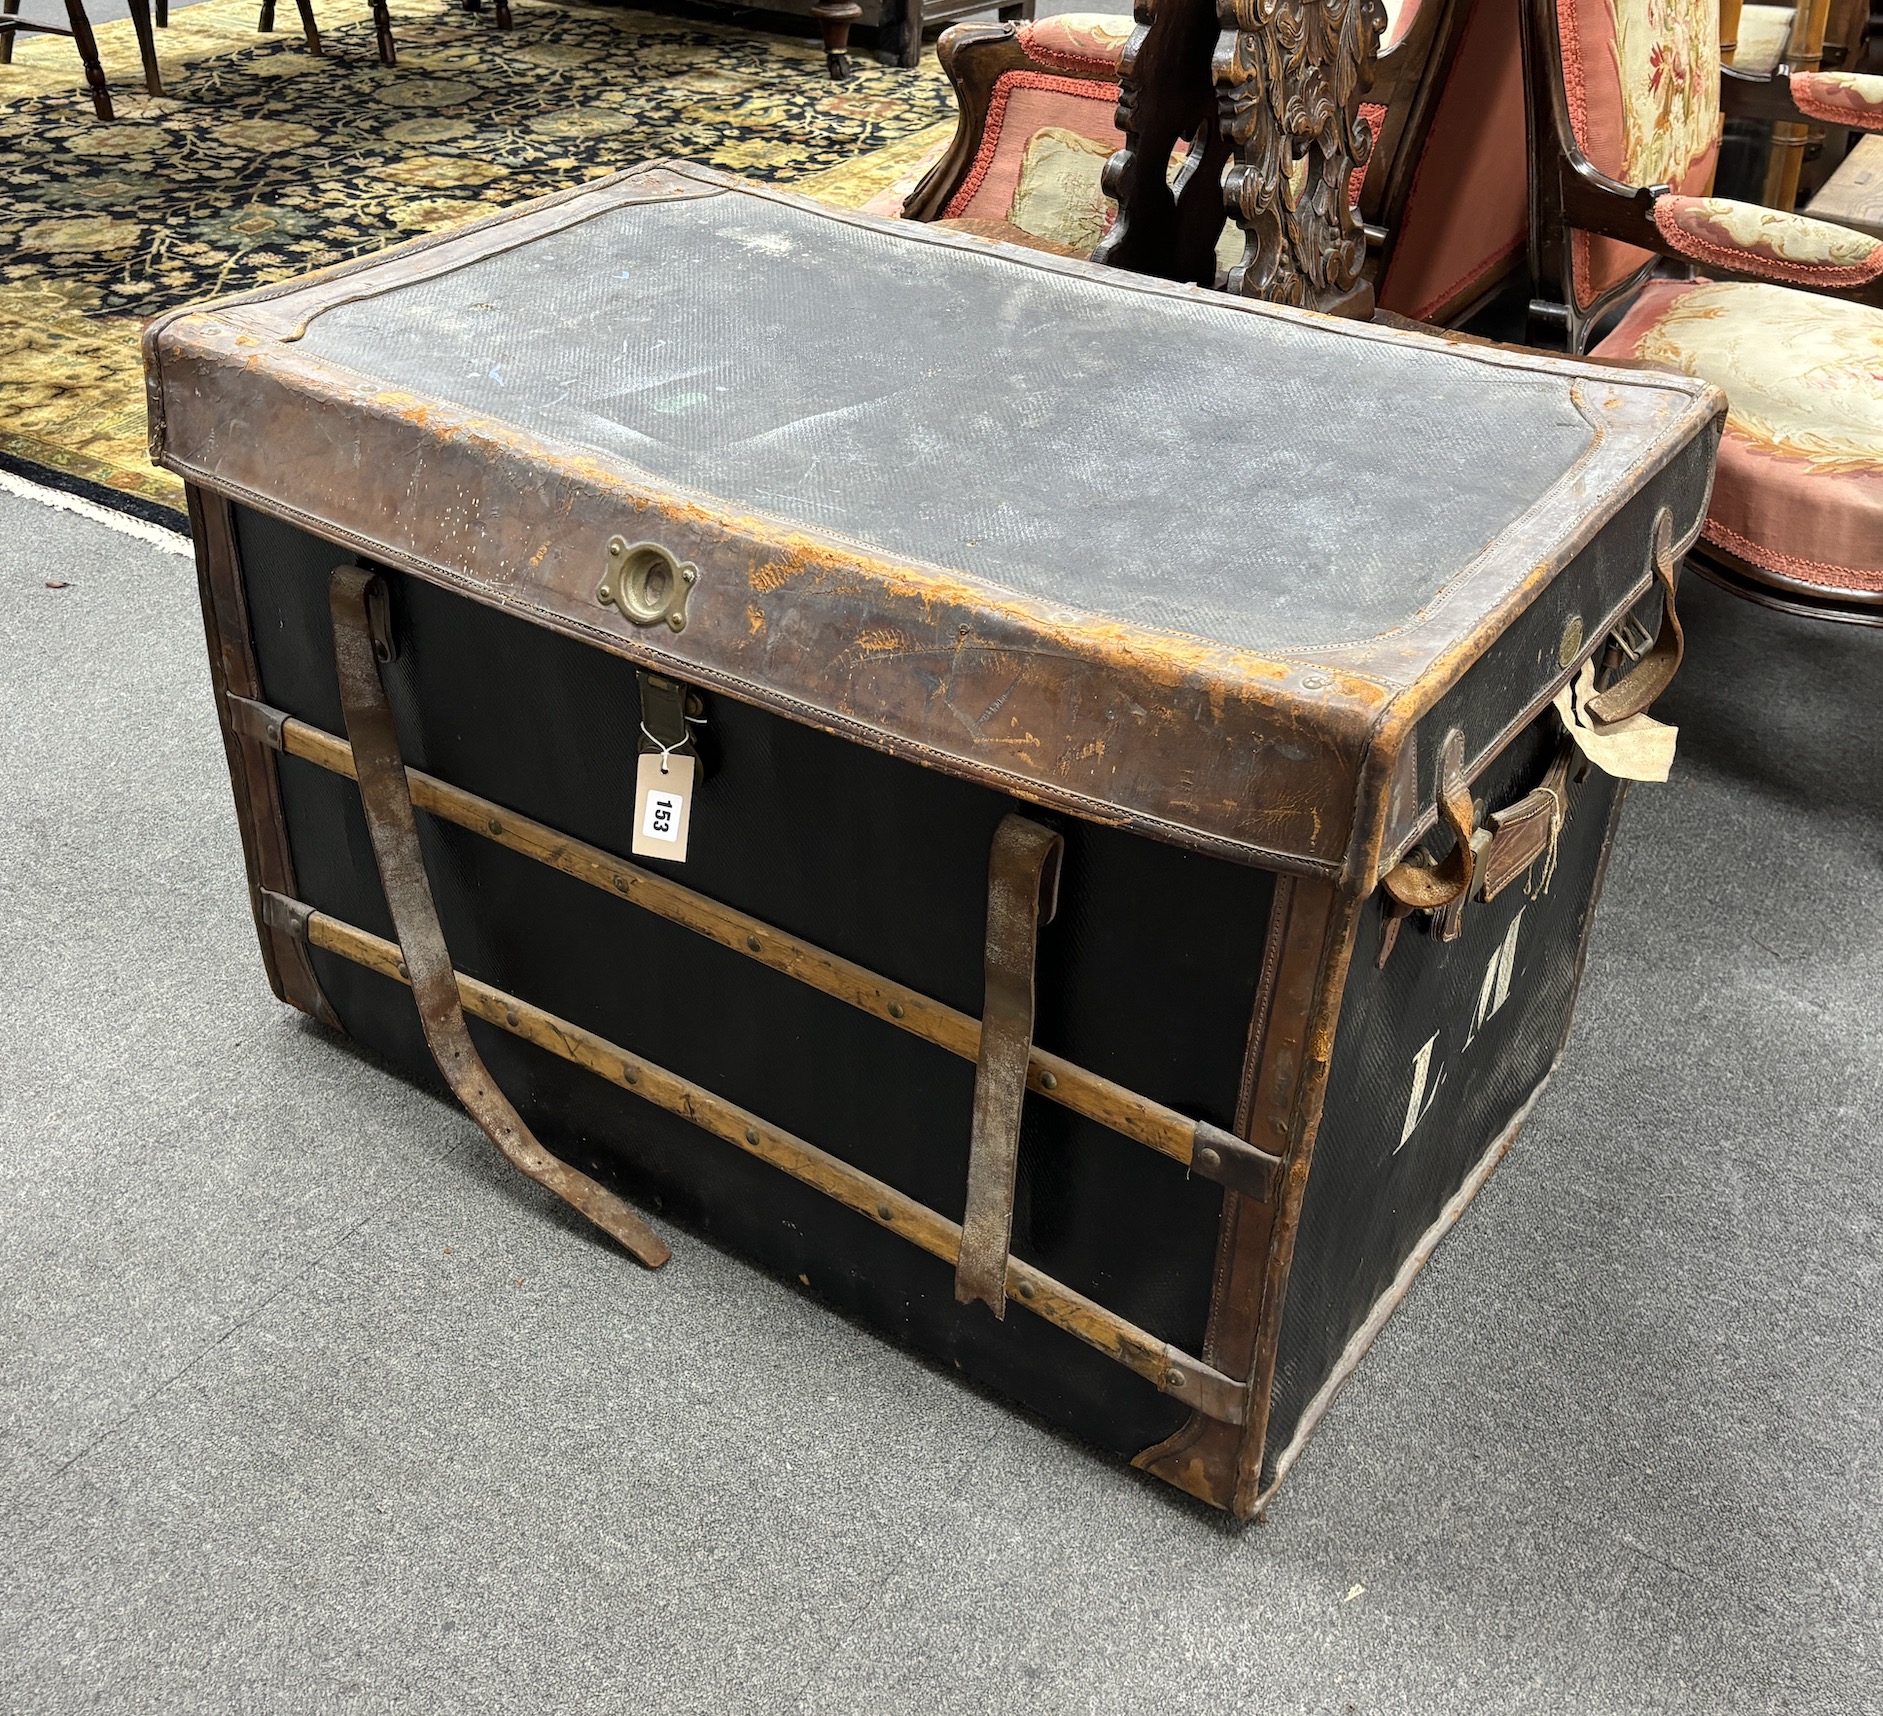 Bertin Freres, Paris, a late 19th century 'Au Depart' tan leather mounted and wood bound travelling trunk, width 93cm, depth 59cm, height 62cm